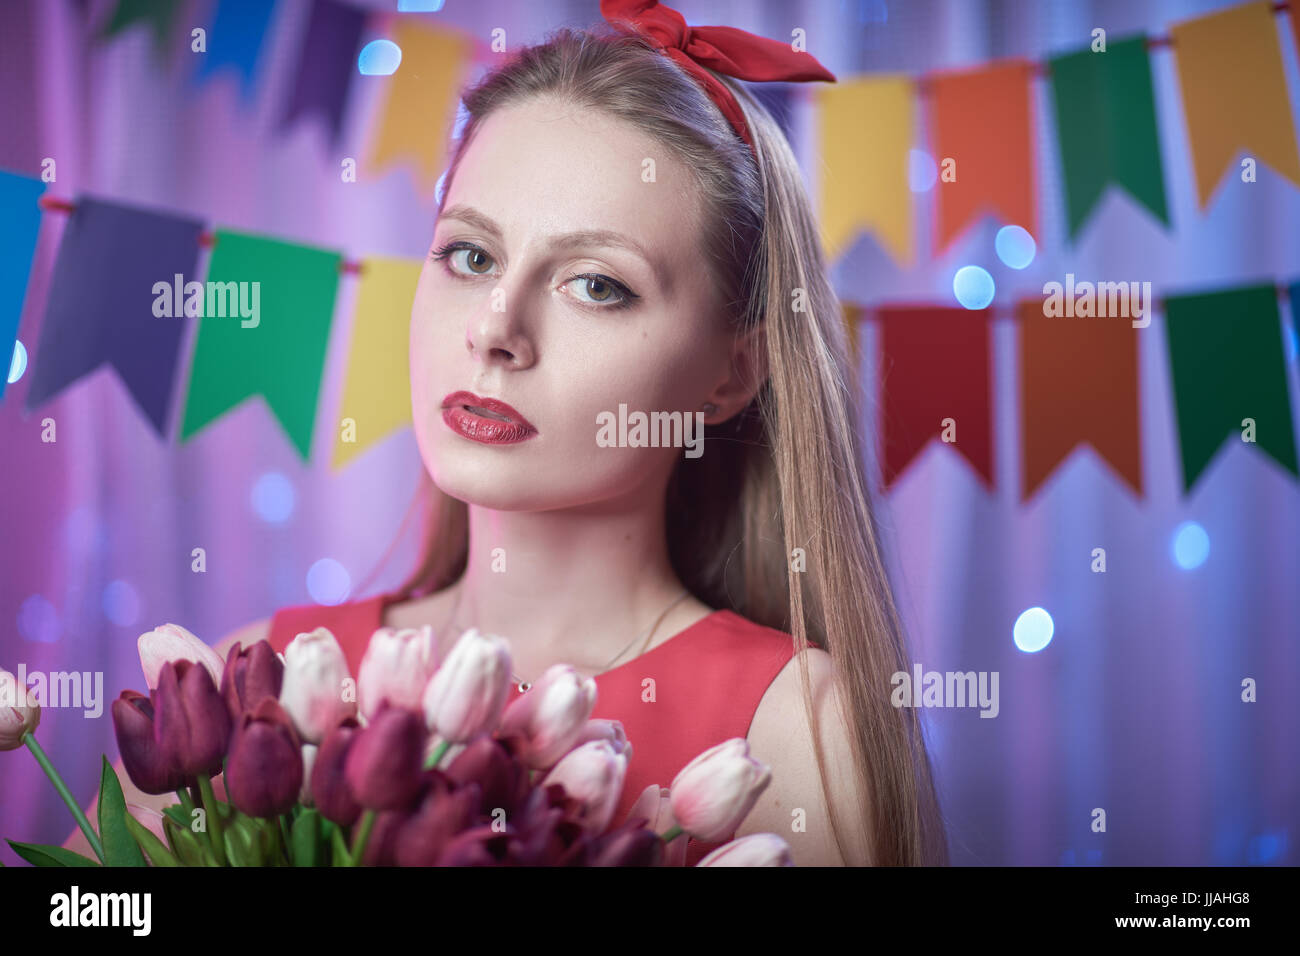 Concept: celebration, birthday. Beautiful young vintage pin up style girl standing in colorful lighted scene holding flowers. Stock Photo